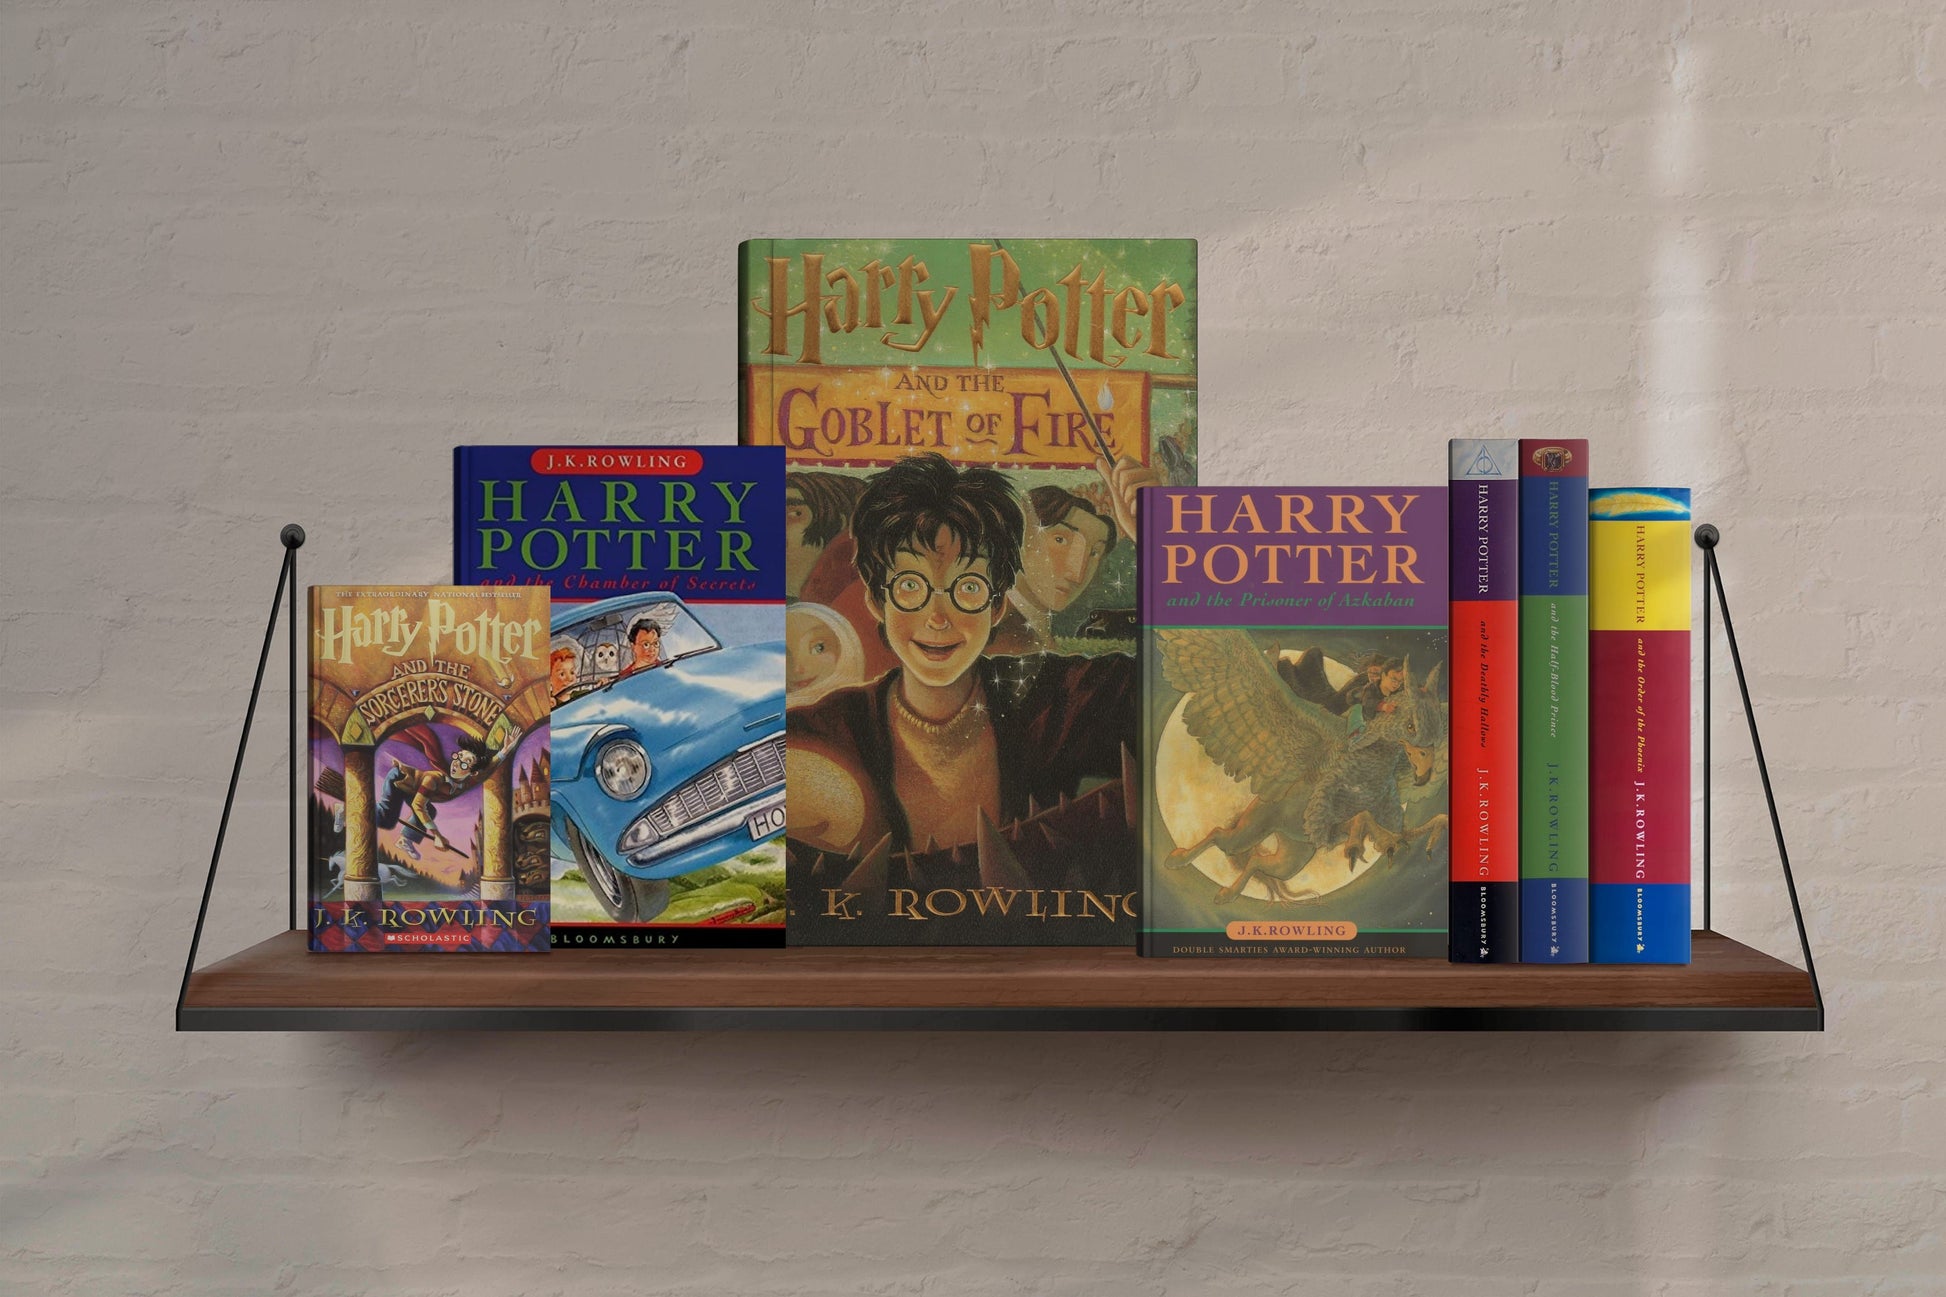 Harry Potter first editions bookshelf poster print shown in a Millenial friendly decor for easy gifting